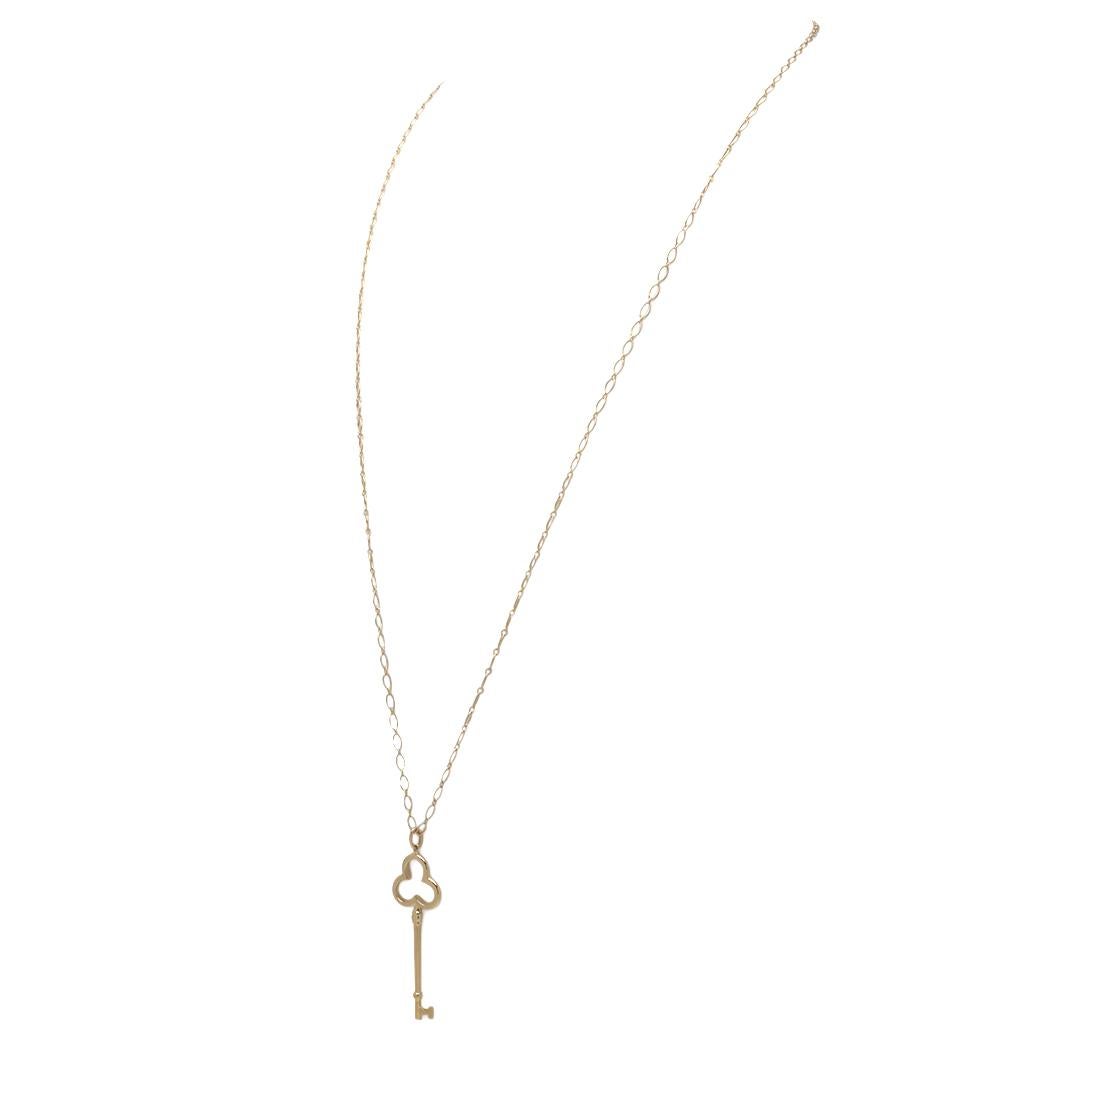 Authentic Tiffany & Co. 'Trefoil Key' pendant crafted in 18 karat yellow gold. The pendant hangs from a Tiffany & Co. oval-link chain necklace crafted in 18 karat yellow gold and measuring 30 inches in length. The pendant measures 59mm in length and